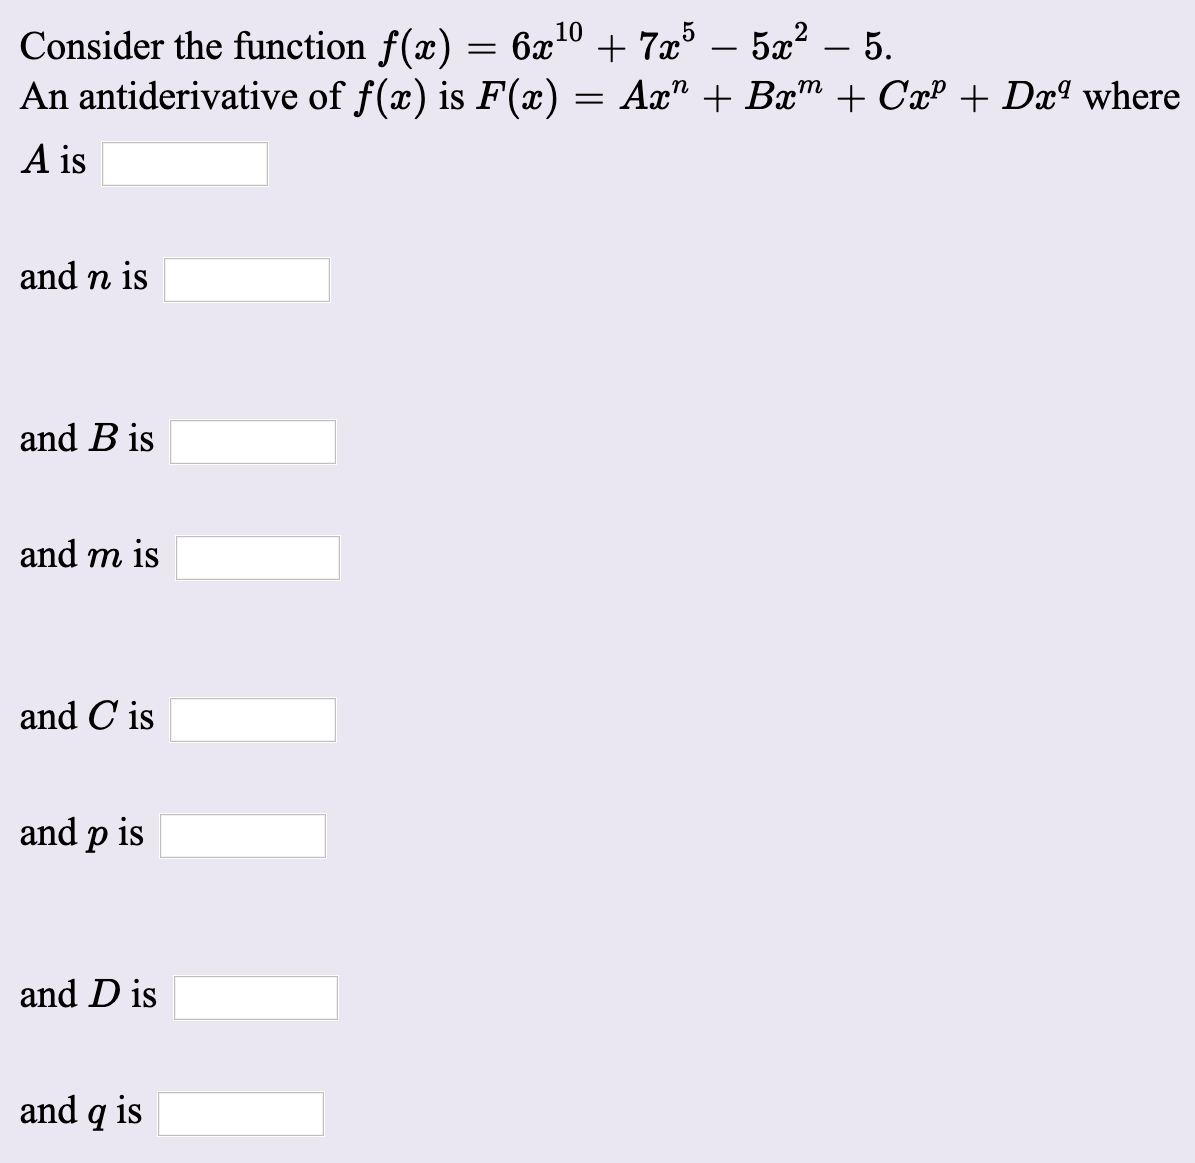 Consider the function f(x) = 6x10 + 7x – 5x² – 5.
An antiderivative of f(x) is F(x) = Ax" + Bx" + CxP + Dxª where
-
A is
and n is
and B is
and m is
and C is
and p is
and D is
and g is
